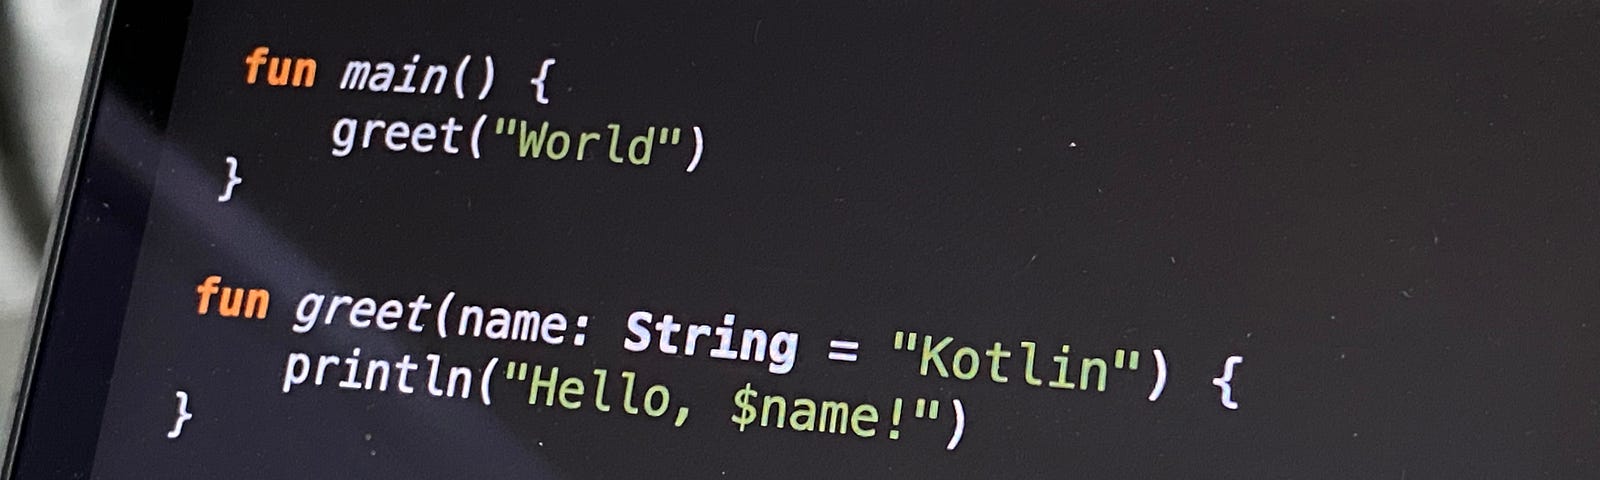 A read-evaluate-print-loop tool showing Hello, World” in Kotlin